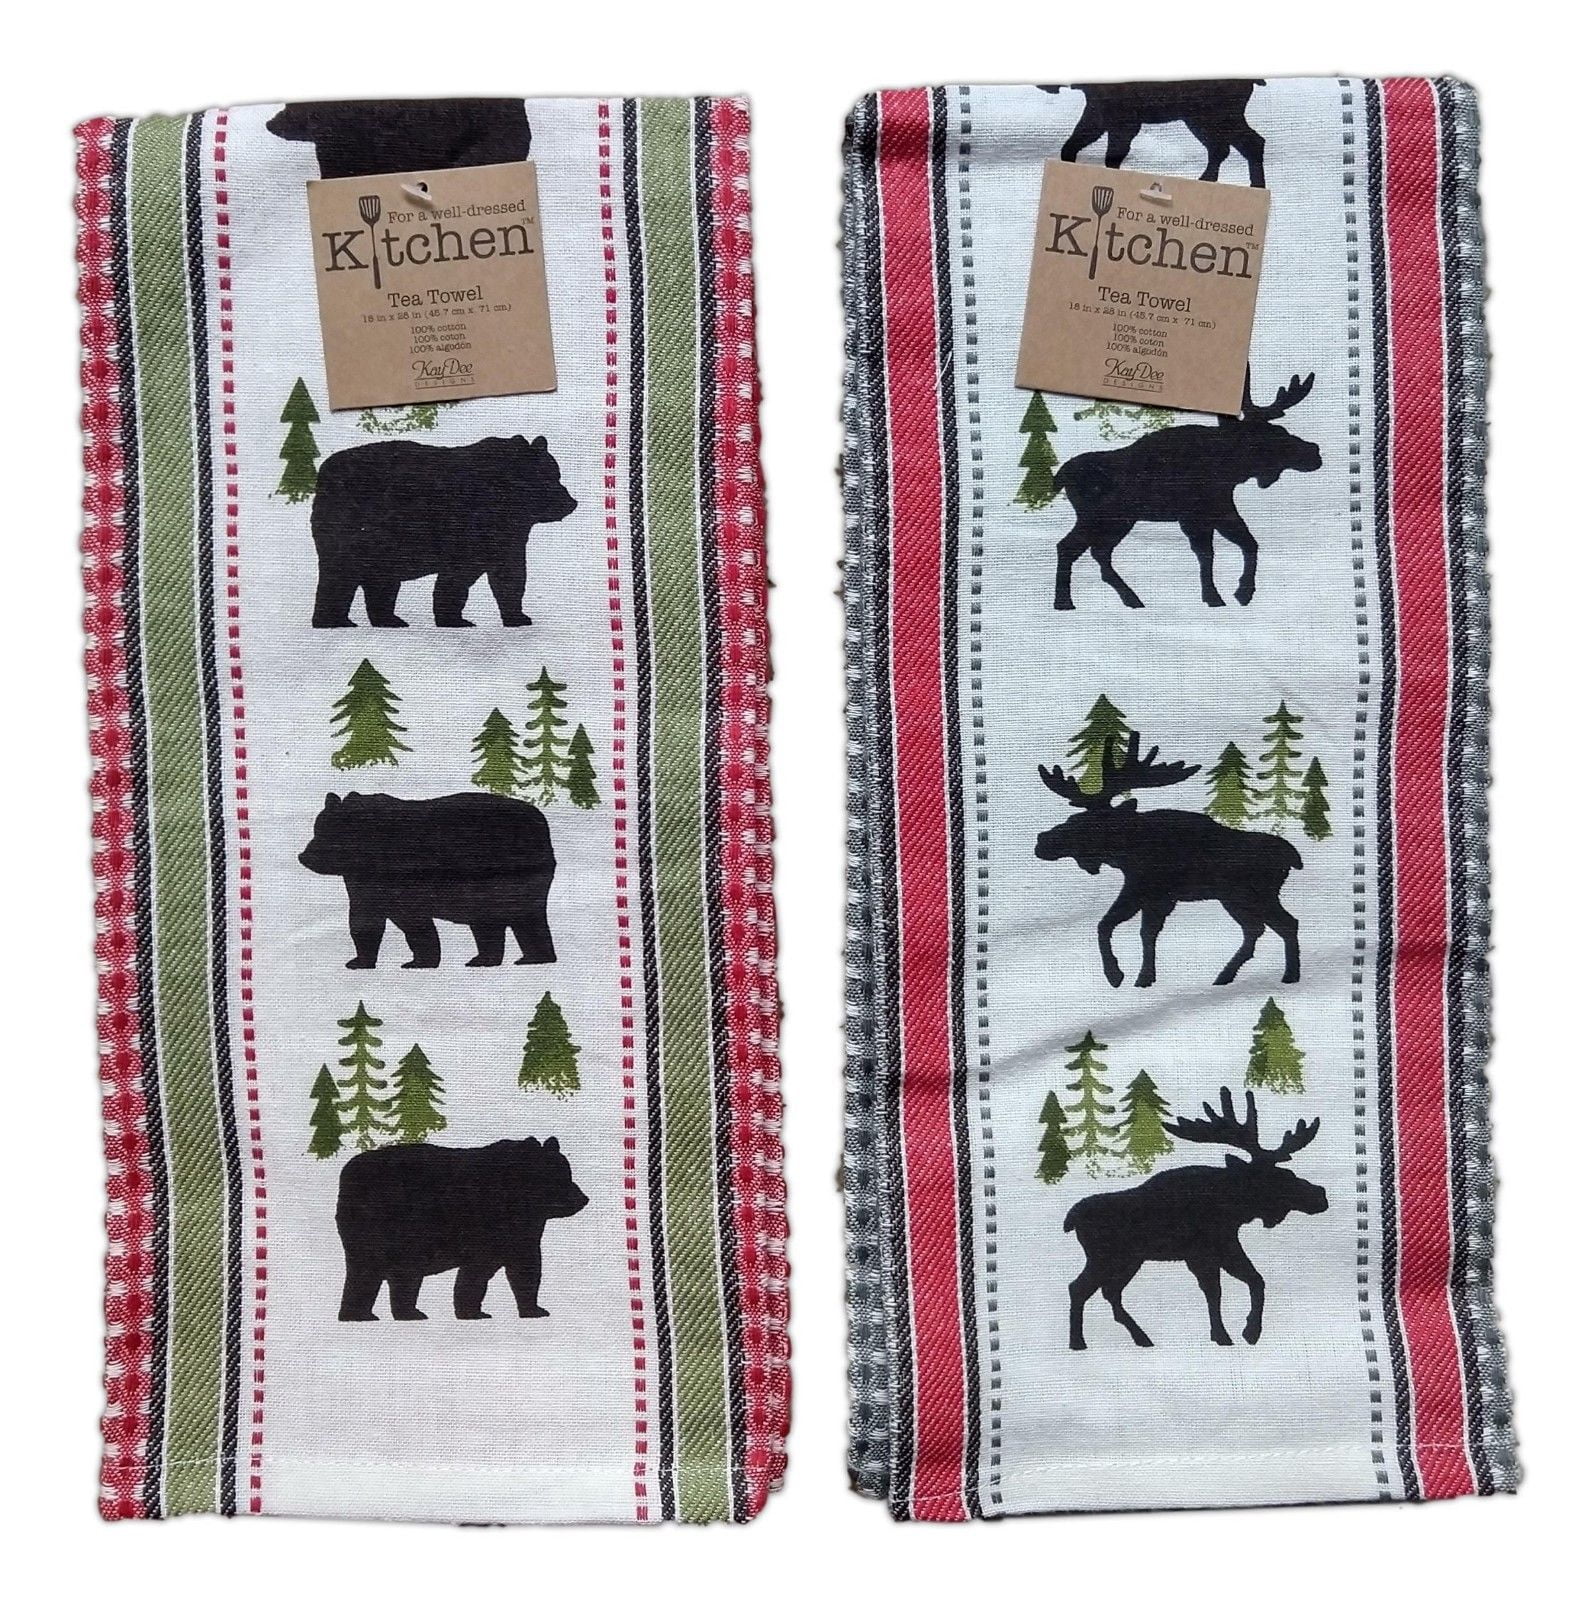 MOOSE DESIGN HAND & FACECLOTH SET TAN EMBROIDERED TOWELS 2 PC 